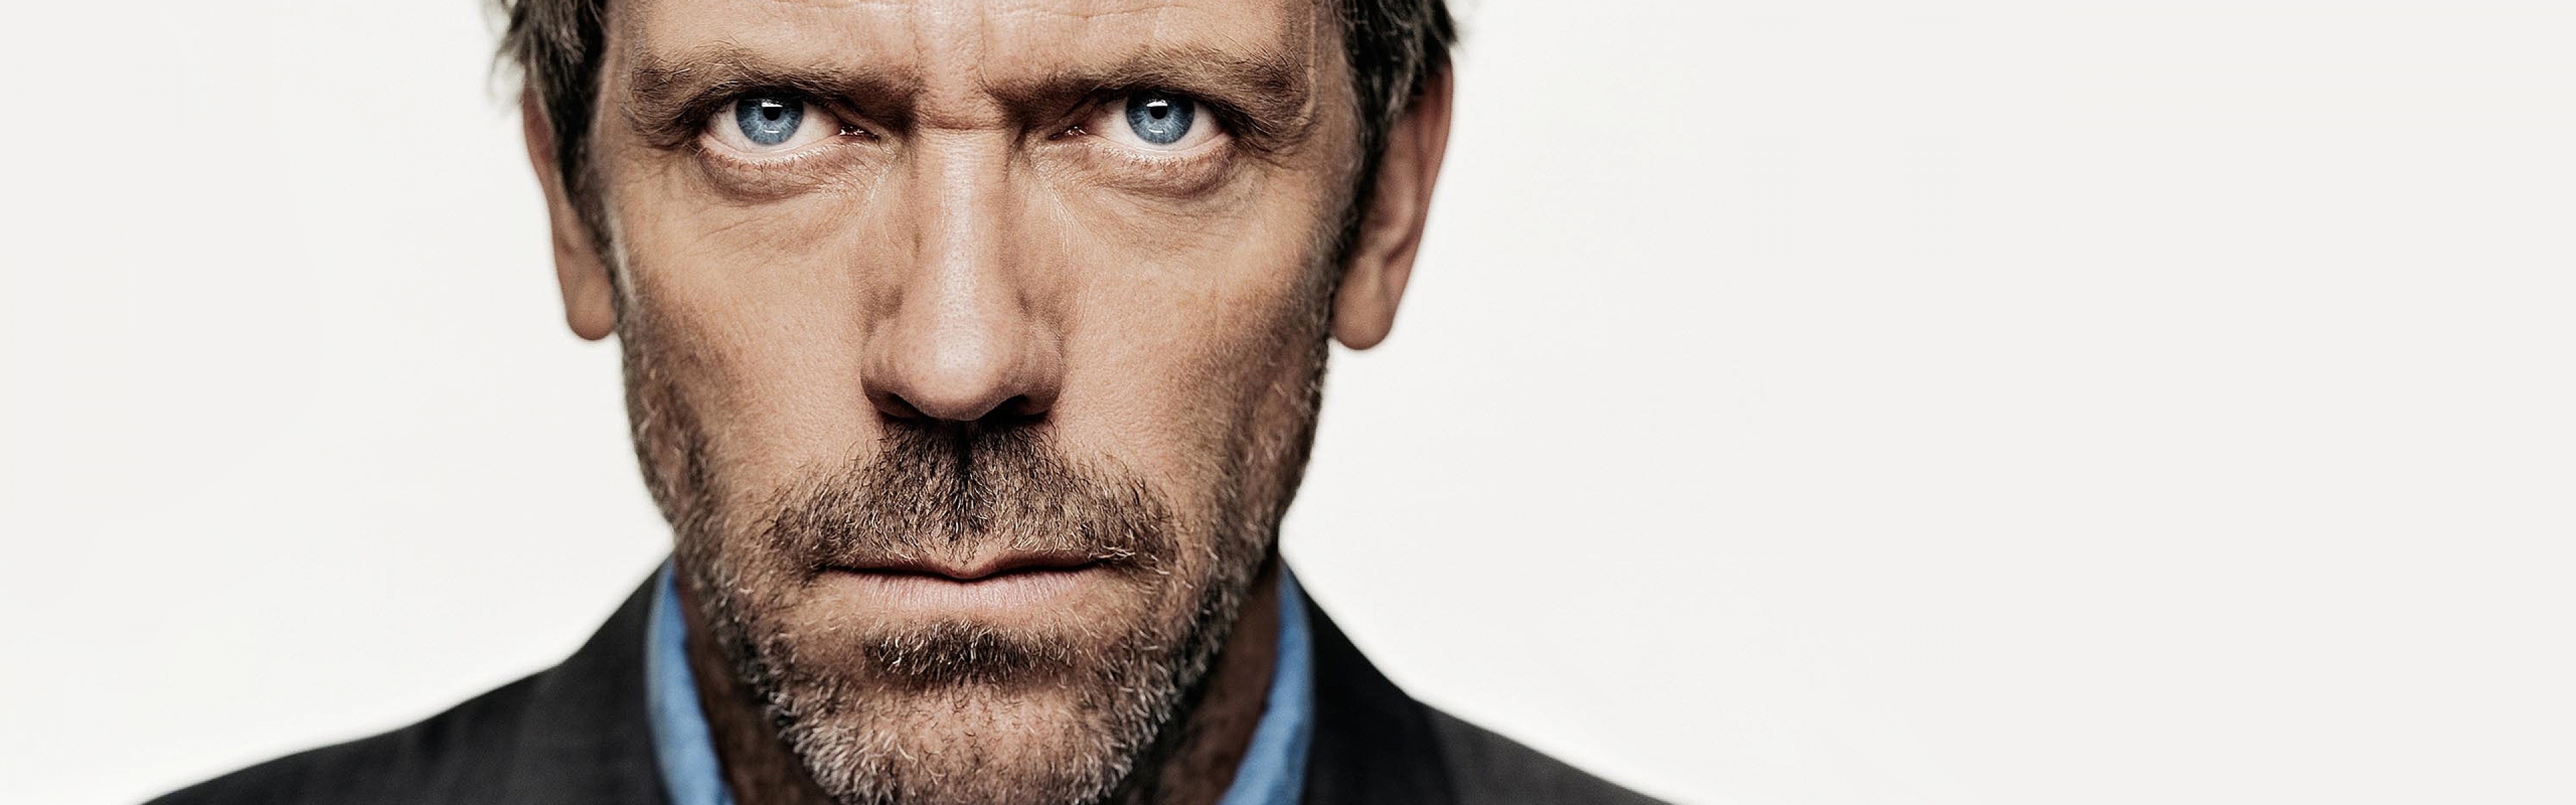 Hugh Laurie movies, High-definition wallpapers, Stunning visuals, Captivating imagery, 3840x1200 Dual Screen Desktop